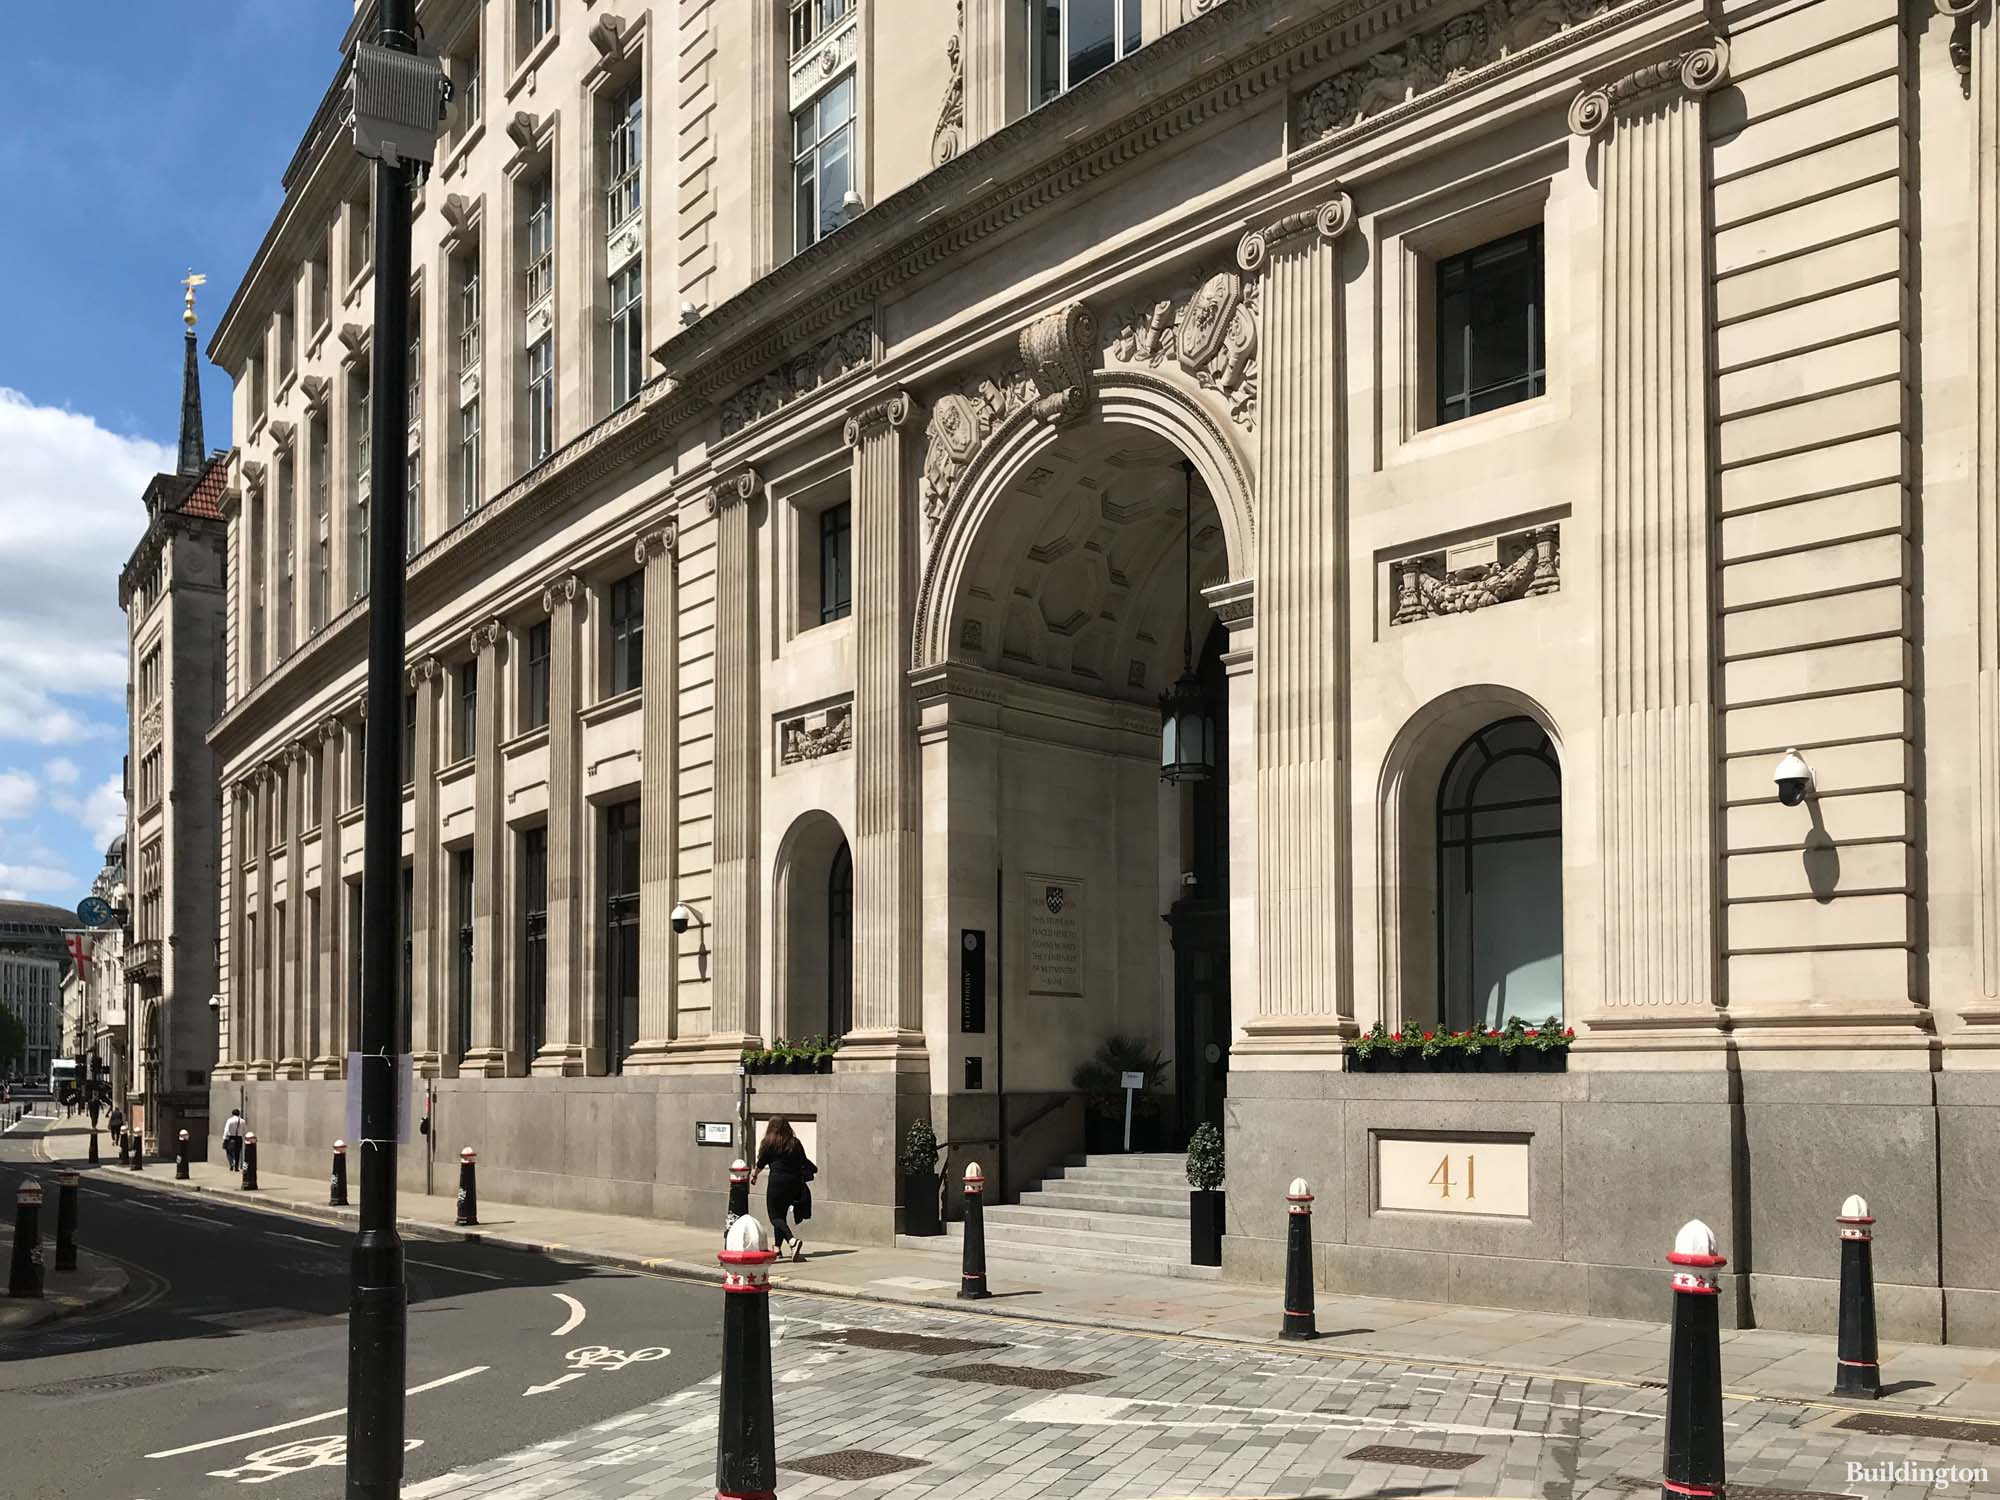 View to the entrance to 41 Lothbury from Bartholomew Lane in the City of London EC2.